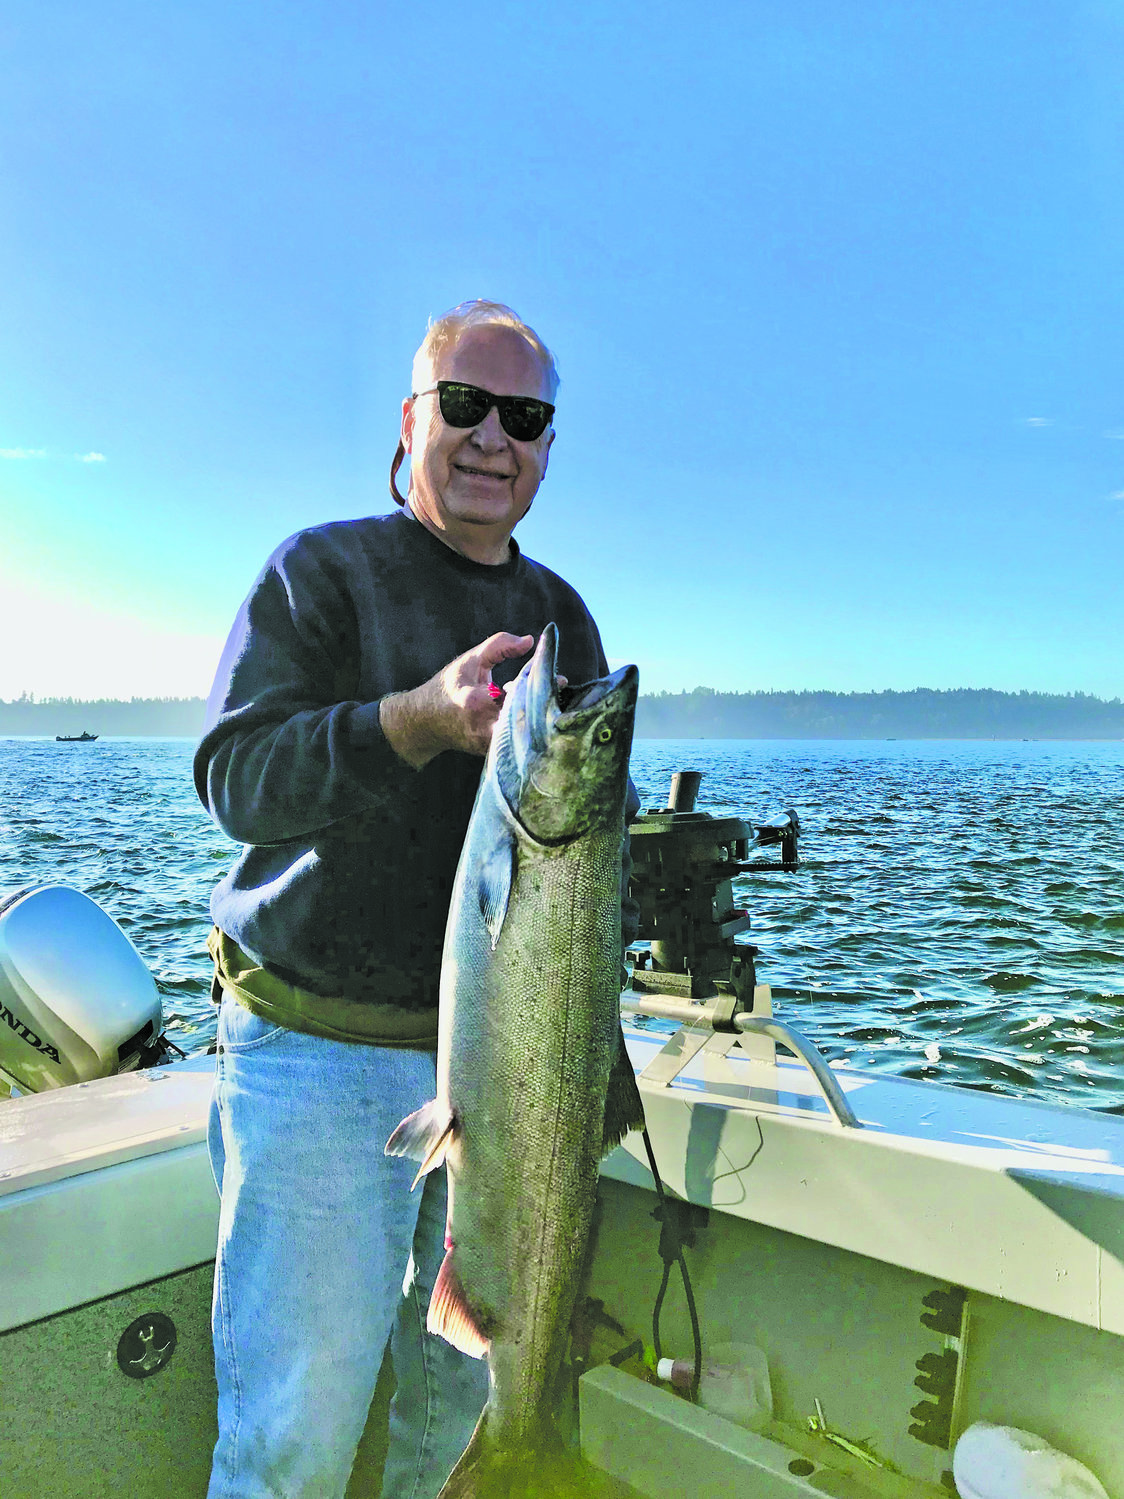 Longbranch resident Rich Hanson shows off his 15 lb. chinook salmon near Filucy Bay.